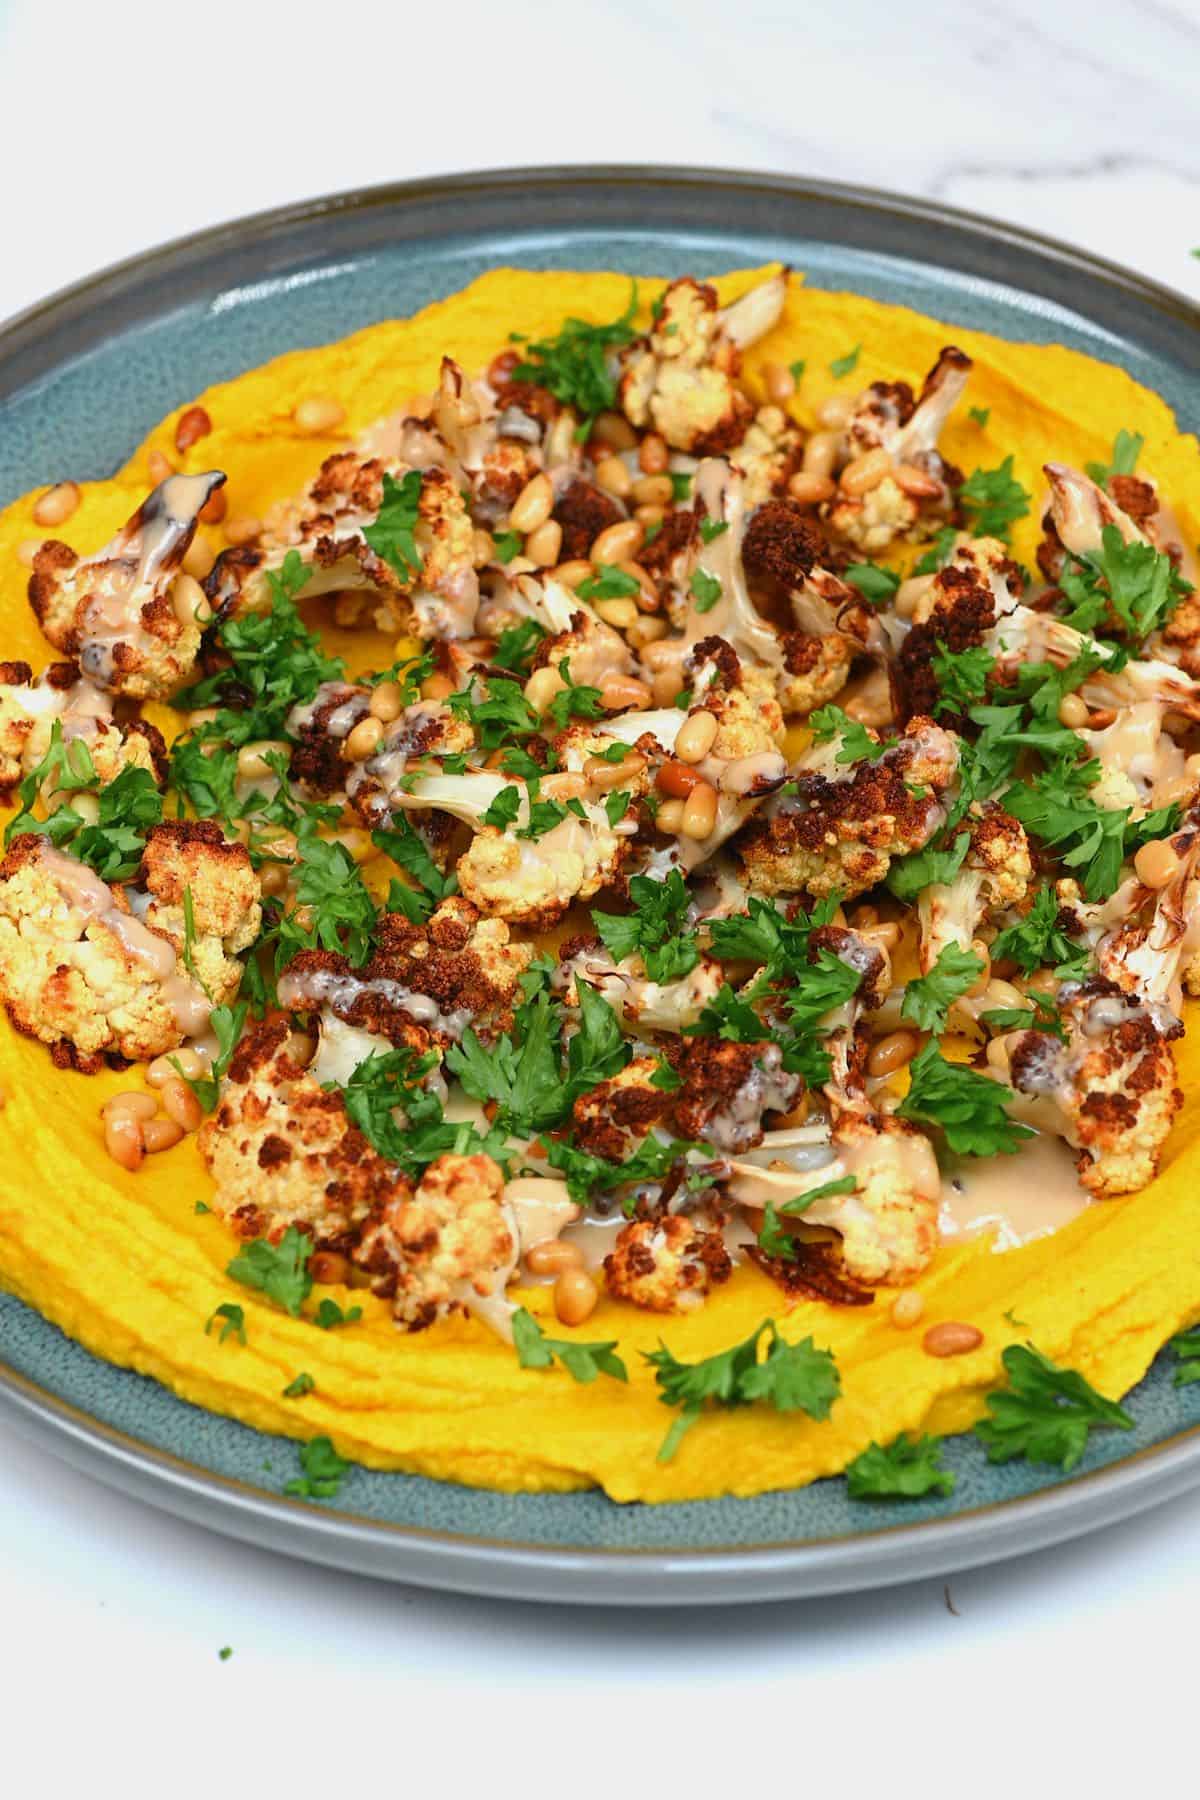 Turmeric hummus topped with cauliflower and parsley